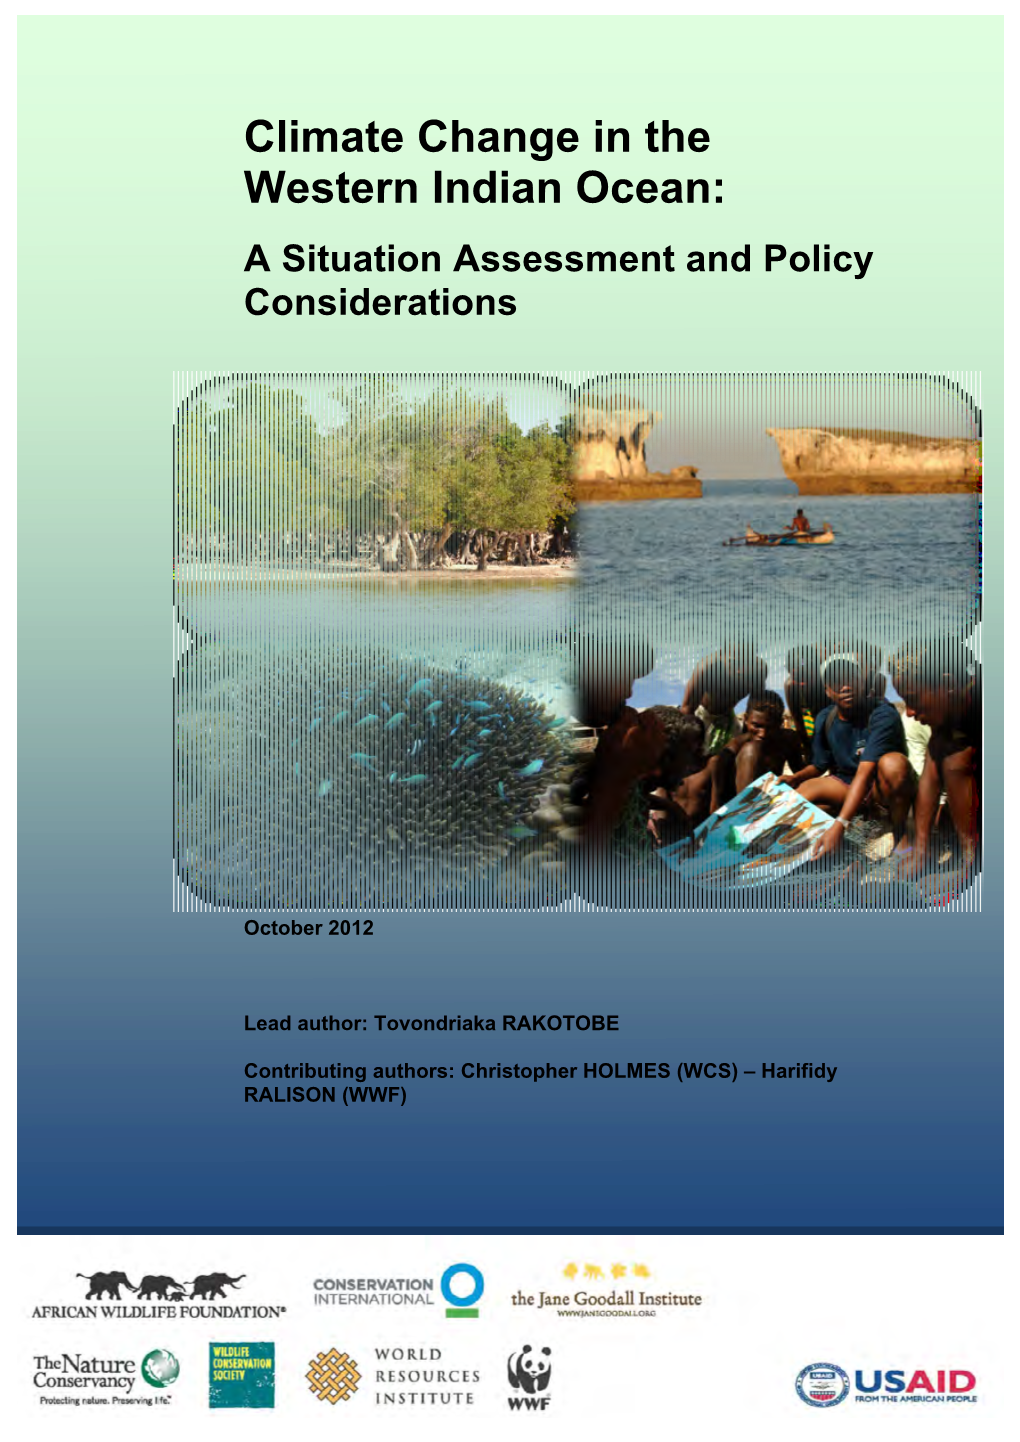 Climate Change in the Western Indian Ocean: a Situation Assessment and Policy Considerations